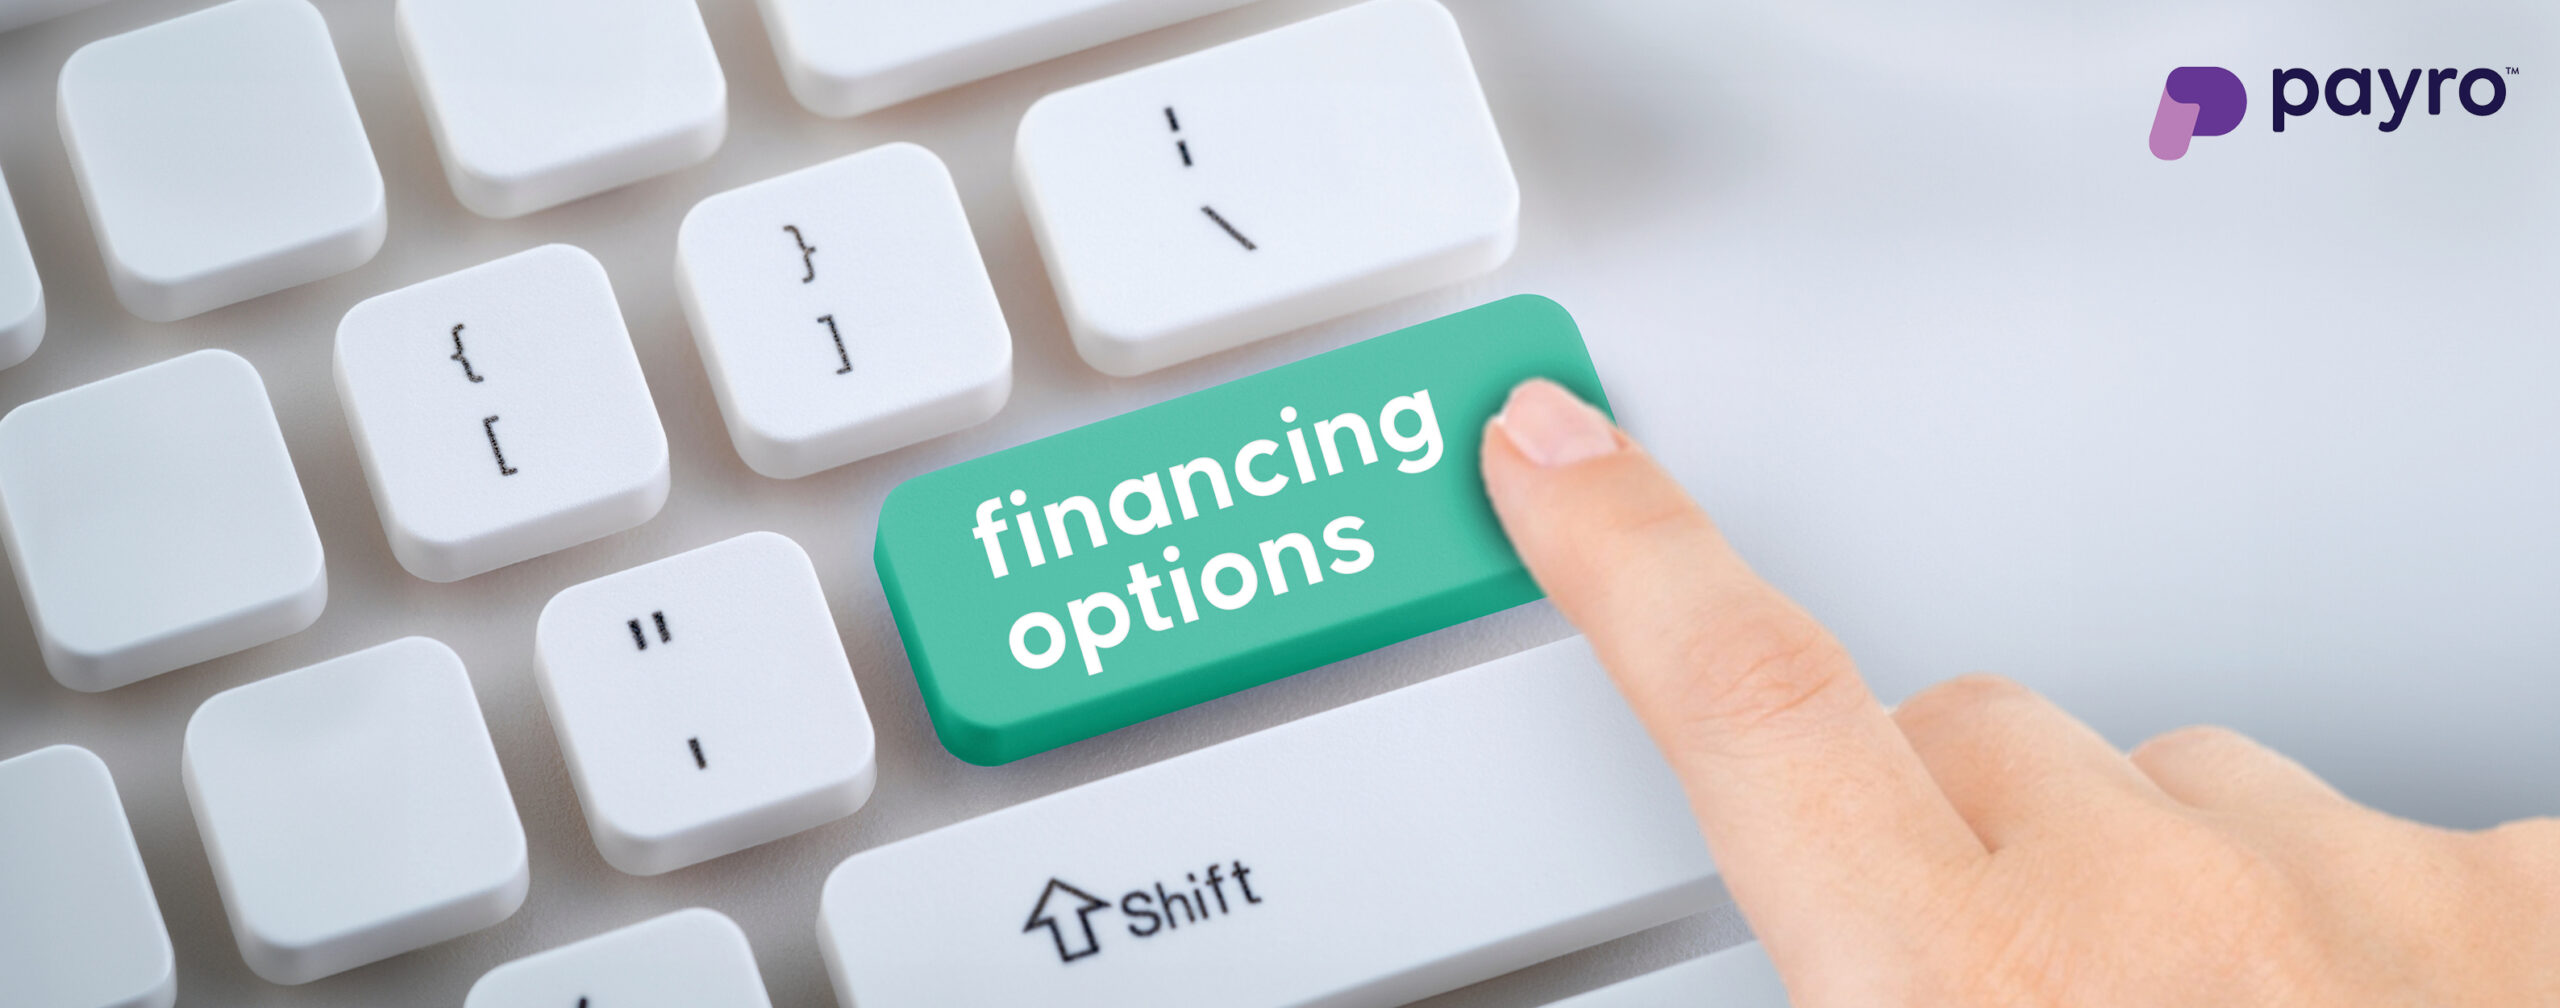 7 alternative financing options for small businesses you haven’t tapped into yet